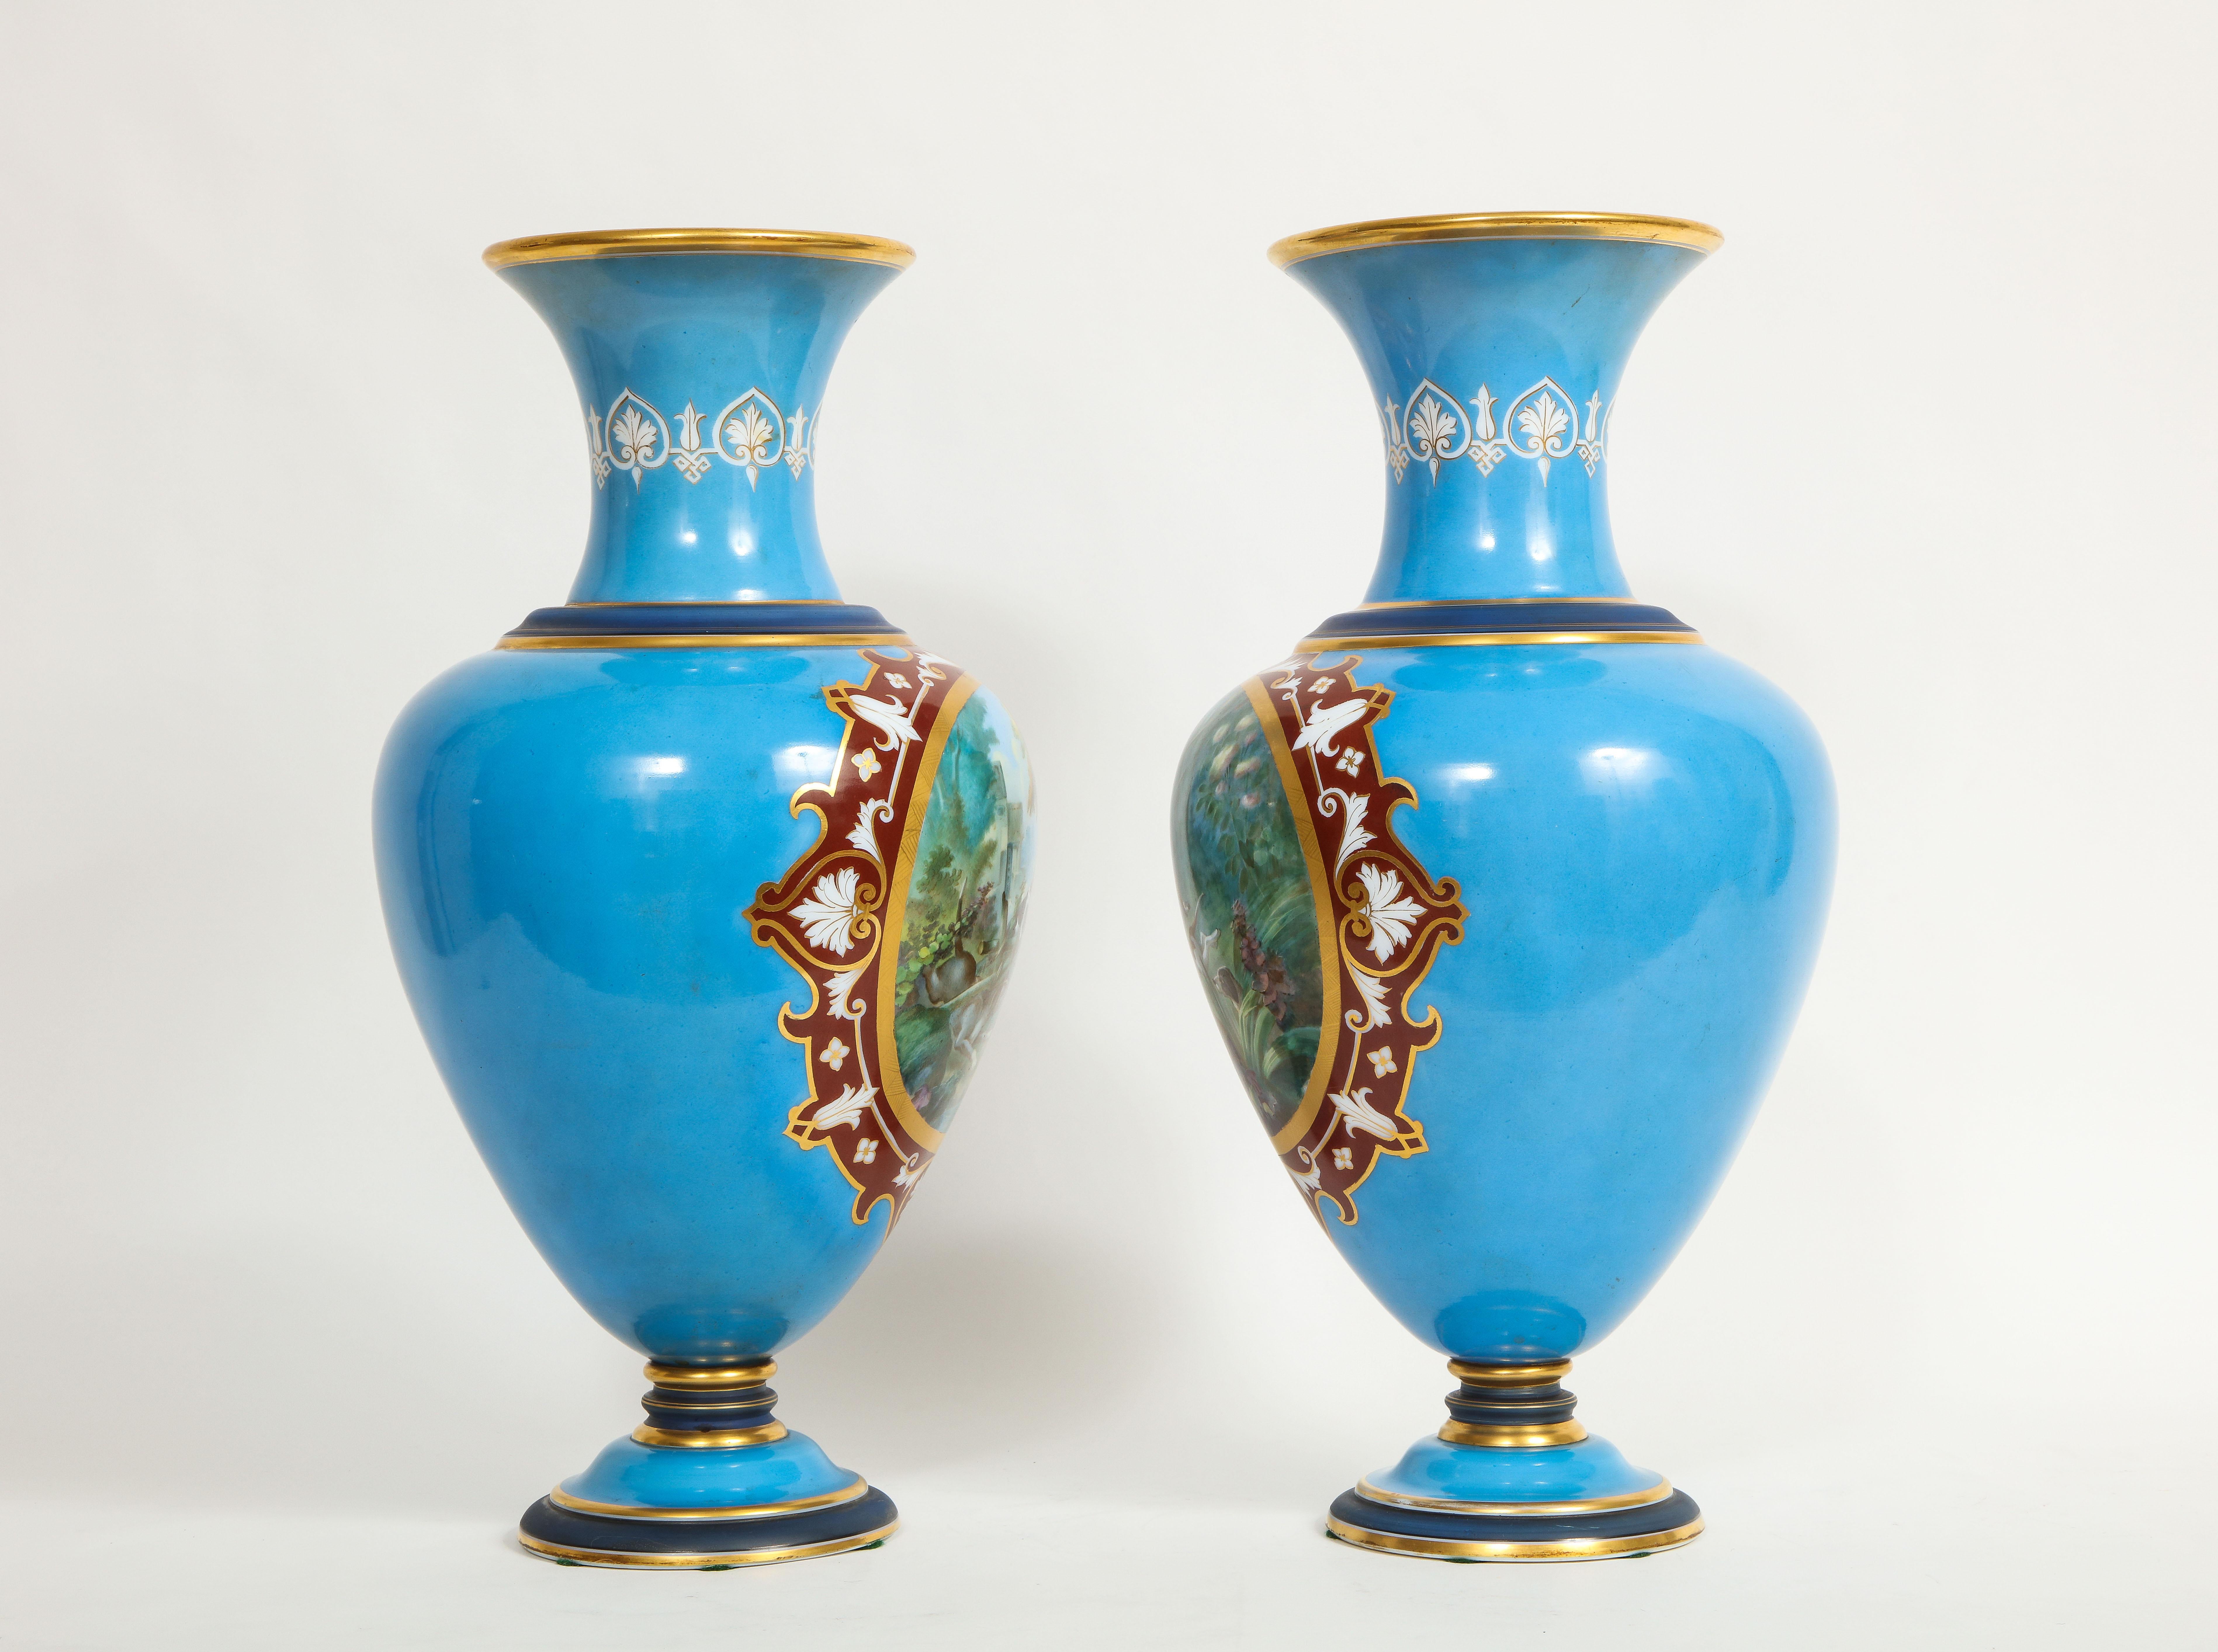 19th Century French Pair of Baccarat Enameled Opaline Vases with Hunting Scenes For Sale 3